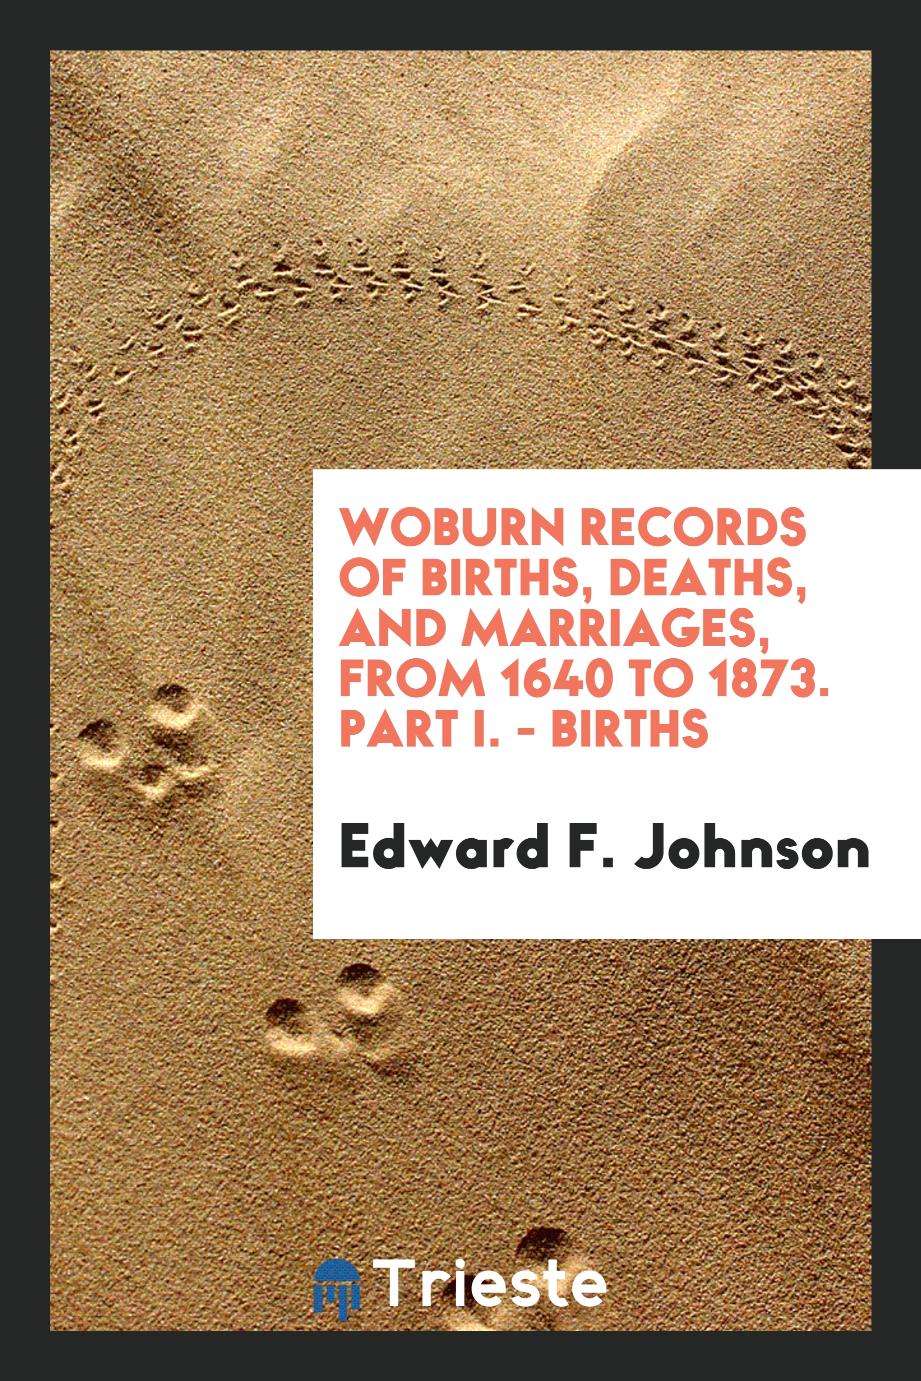 Woburn Records of Births, Deaths, and Marriages, from 1640 to 1873. Part I. - Births